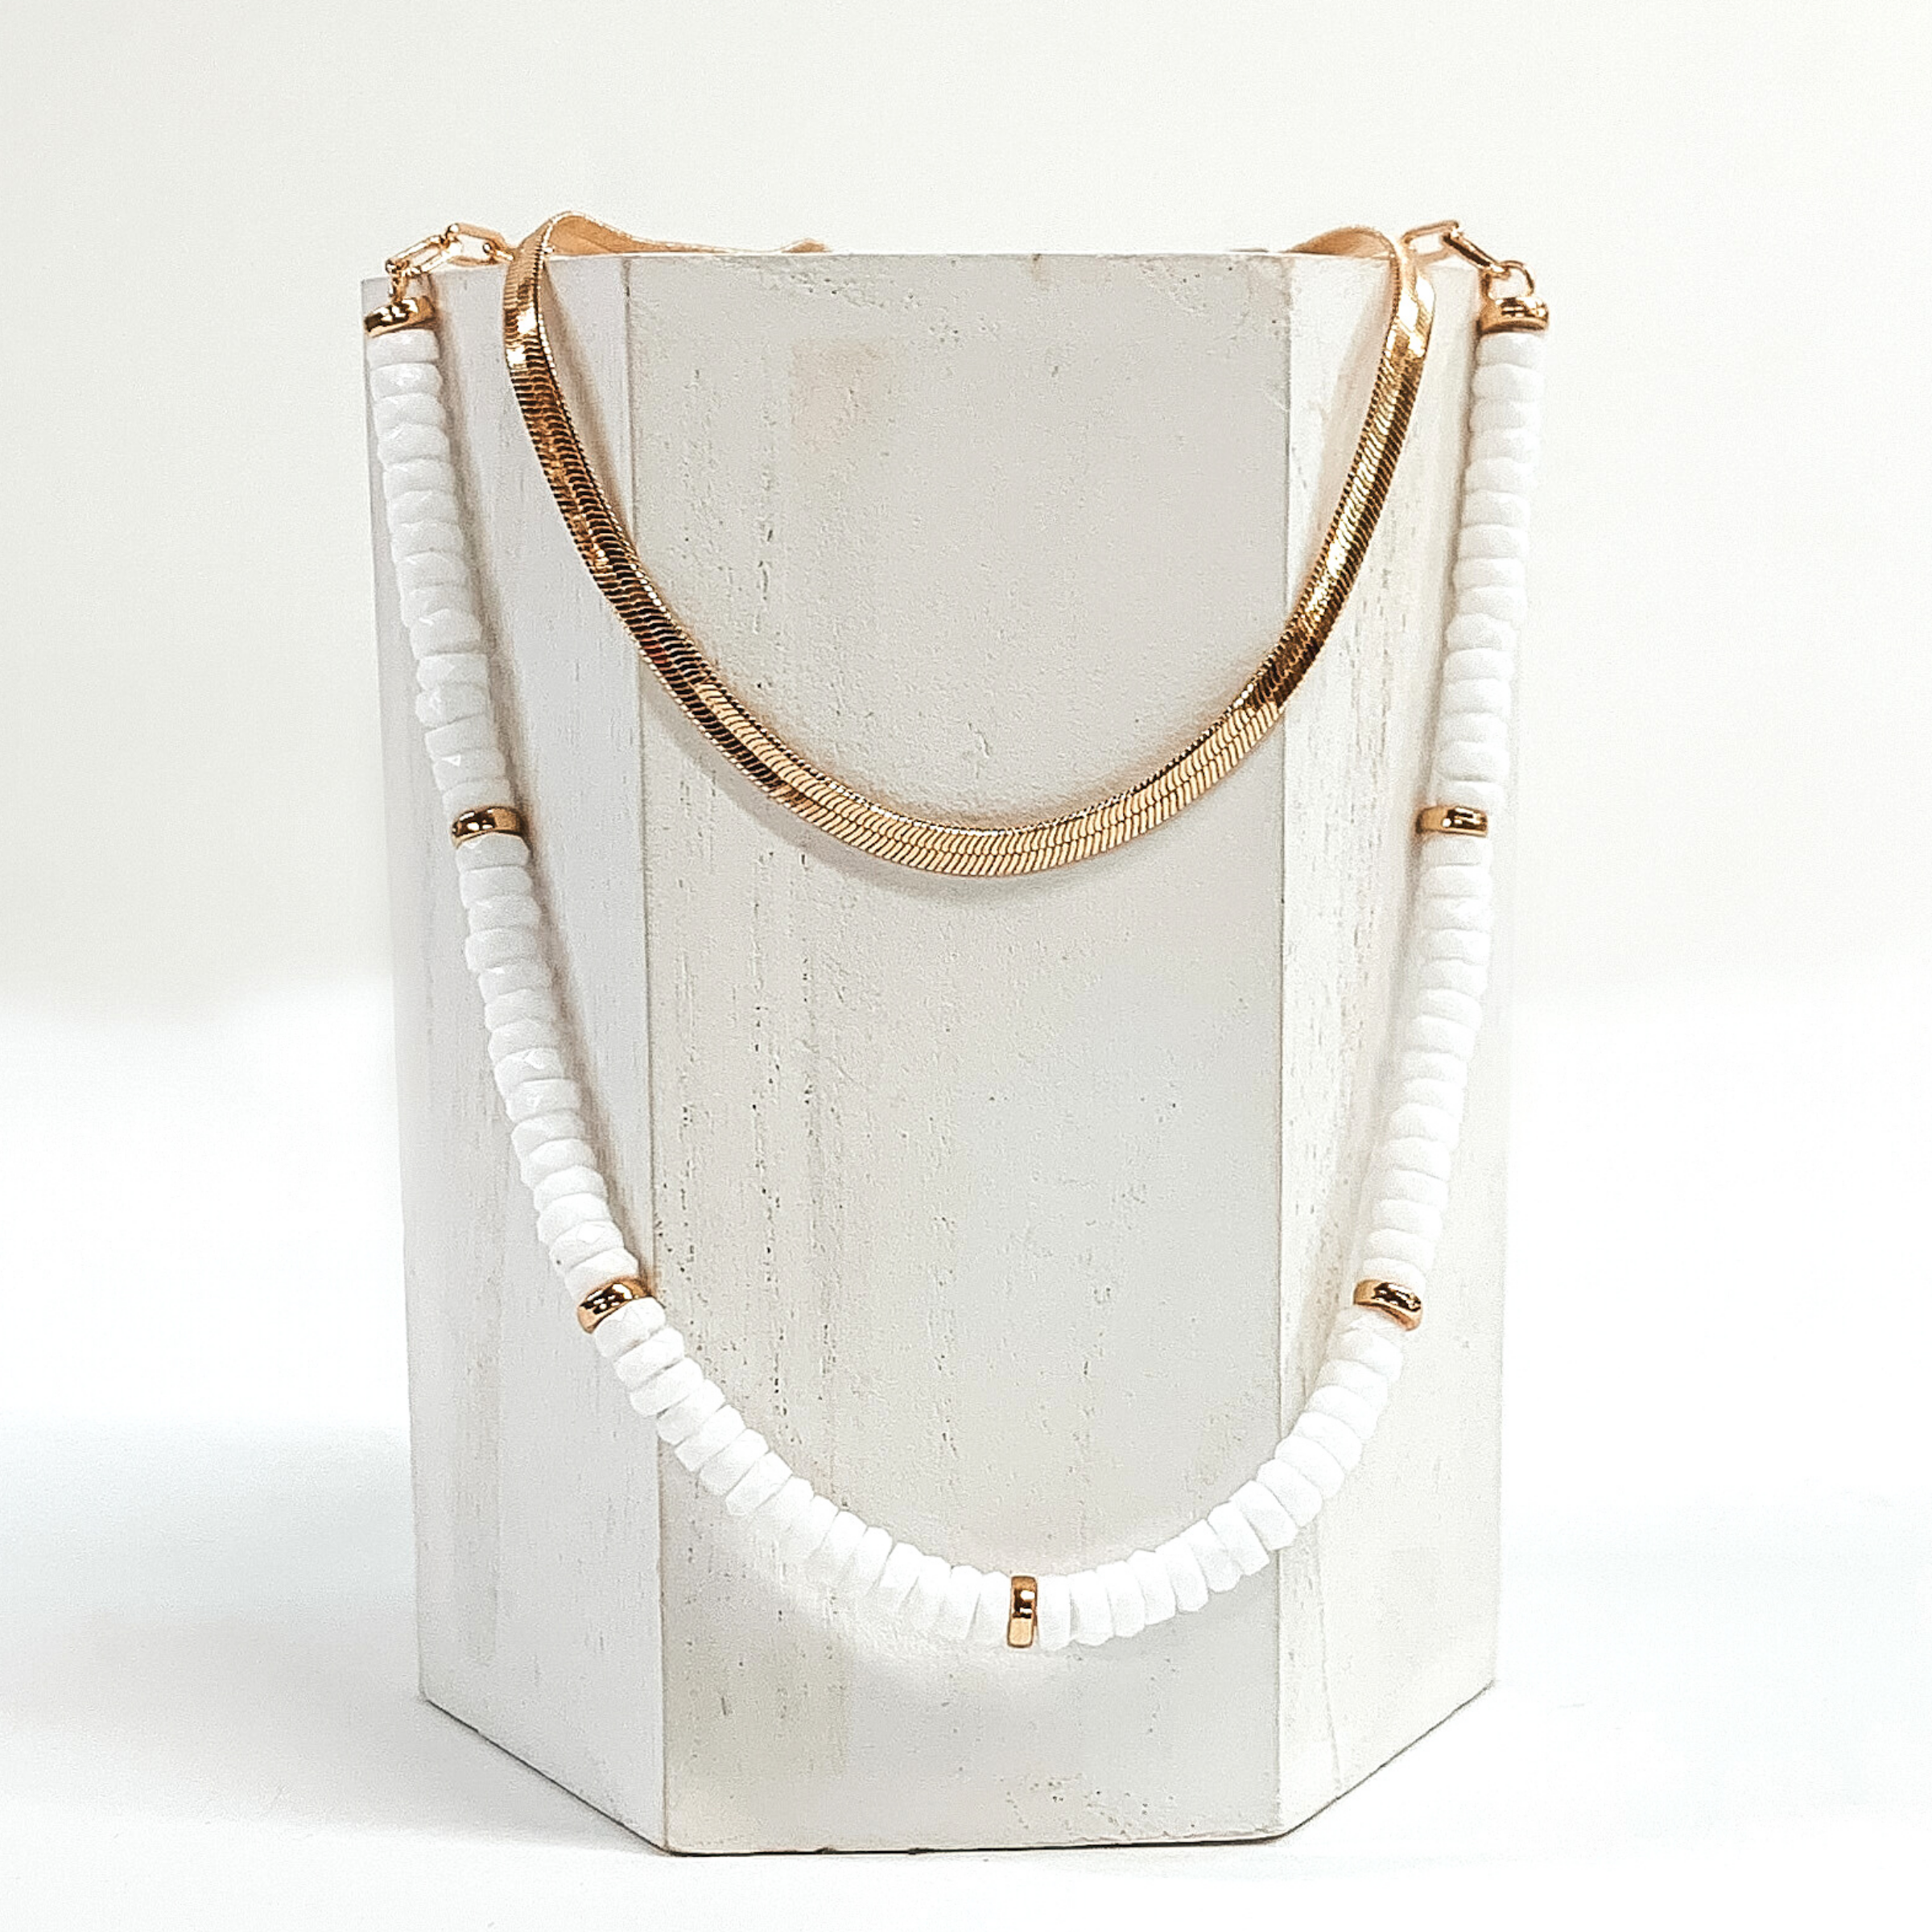 This necklace has a shorter gold snake chain and a longer white beaded necklace with gold bead spacers. This necklace is laid on a piece of white wood that is pictured on a white background.